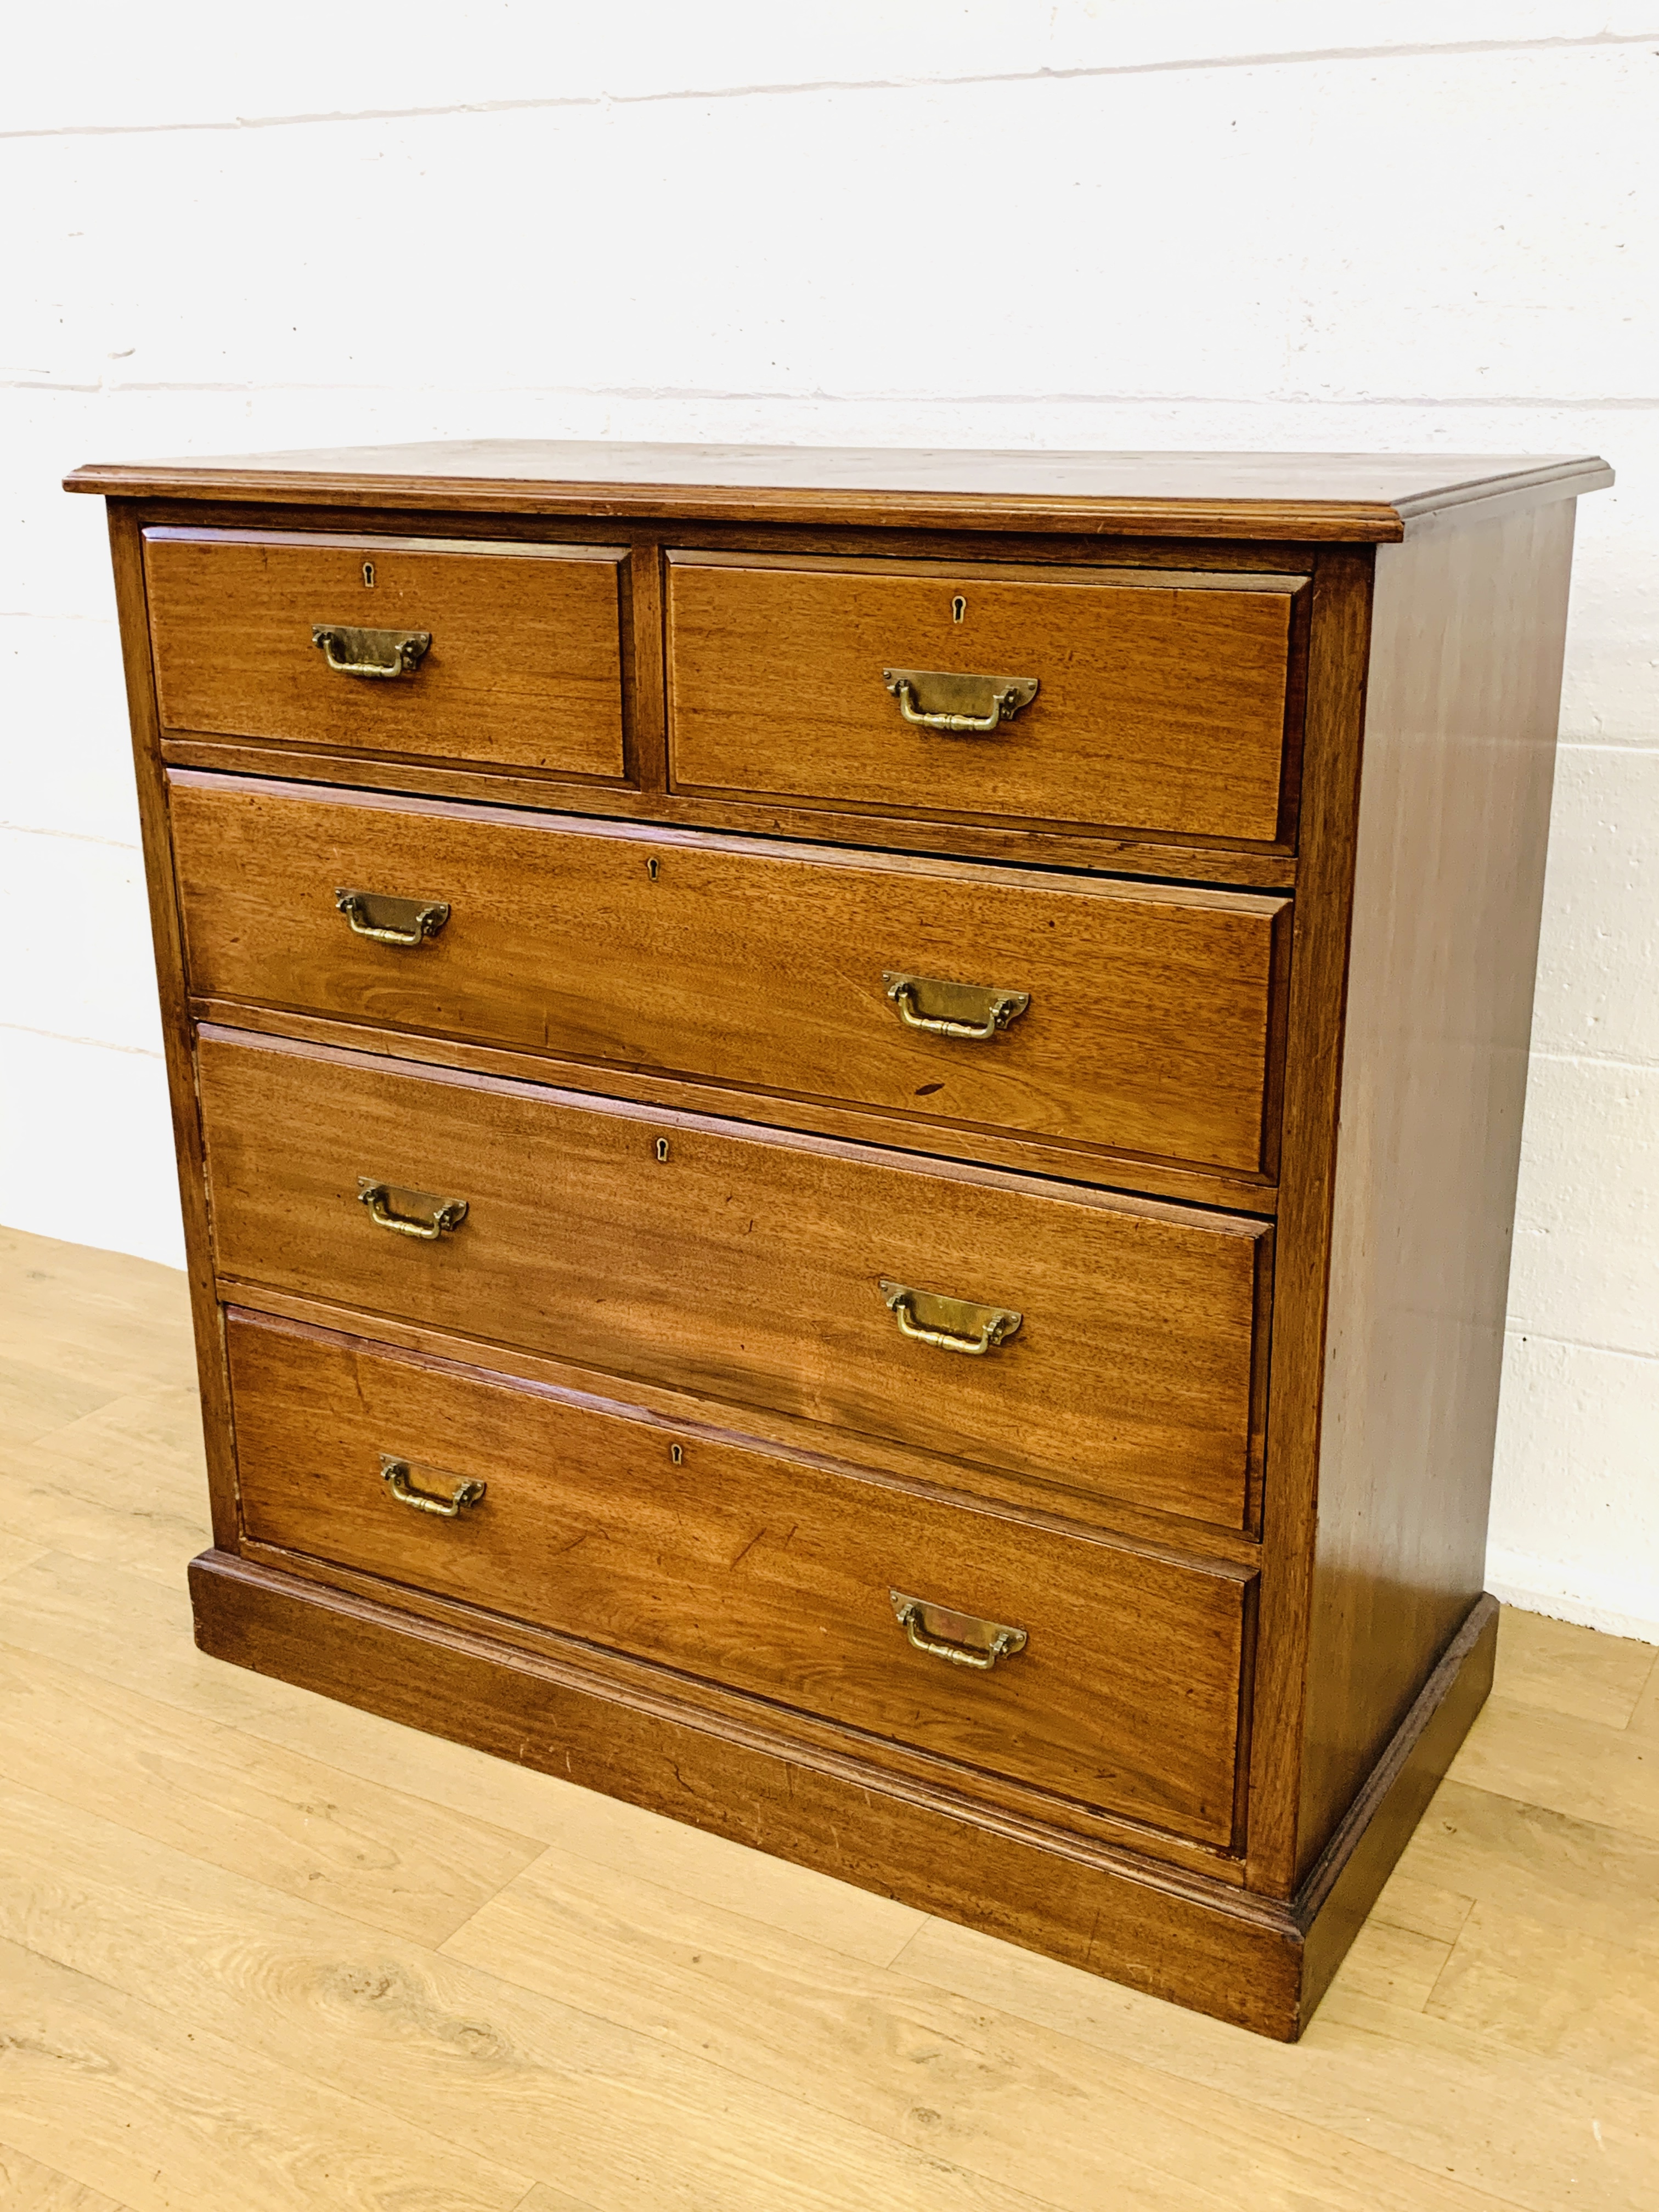 Mahogany chest of drawers - Image 8 of 8